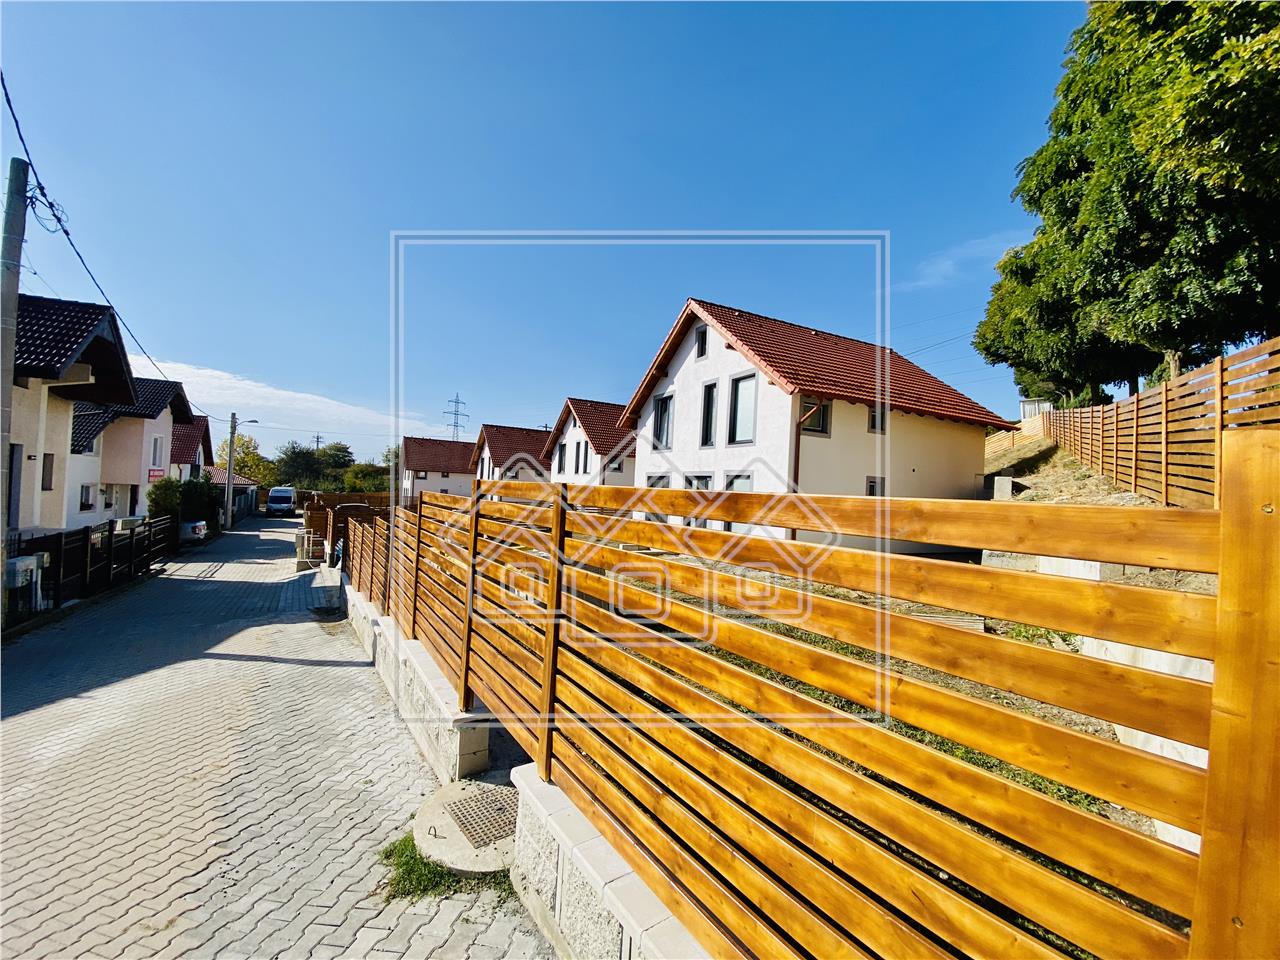 House for sale in Sibiu land of 778 sqm